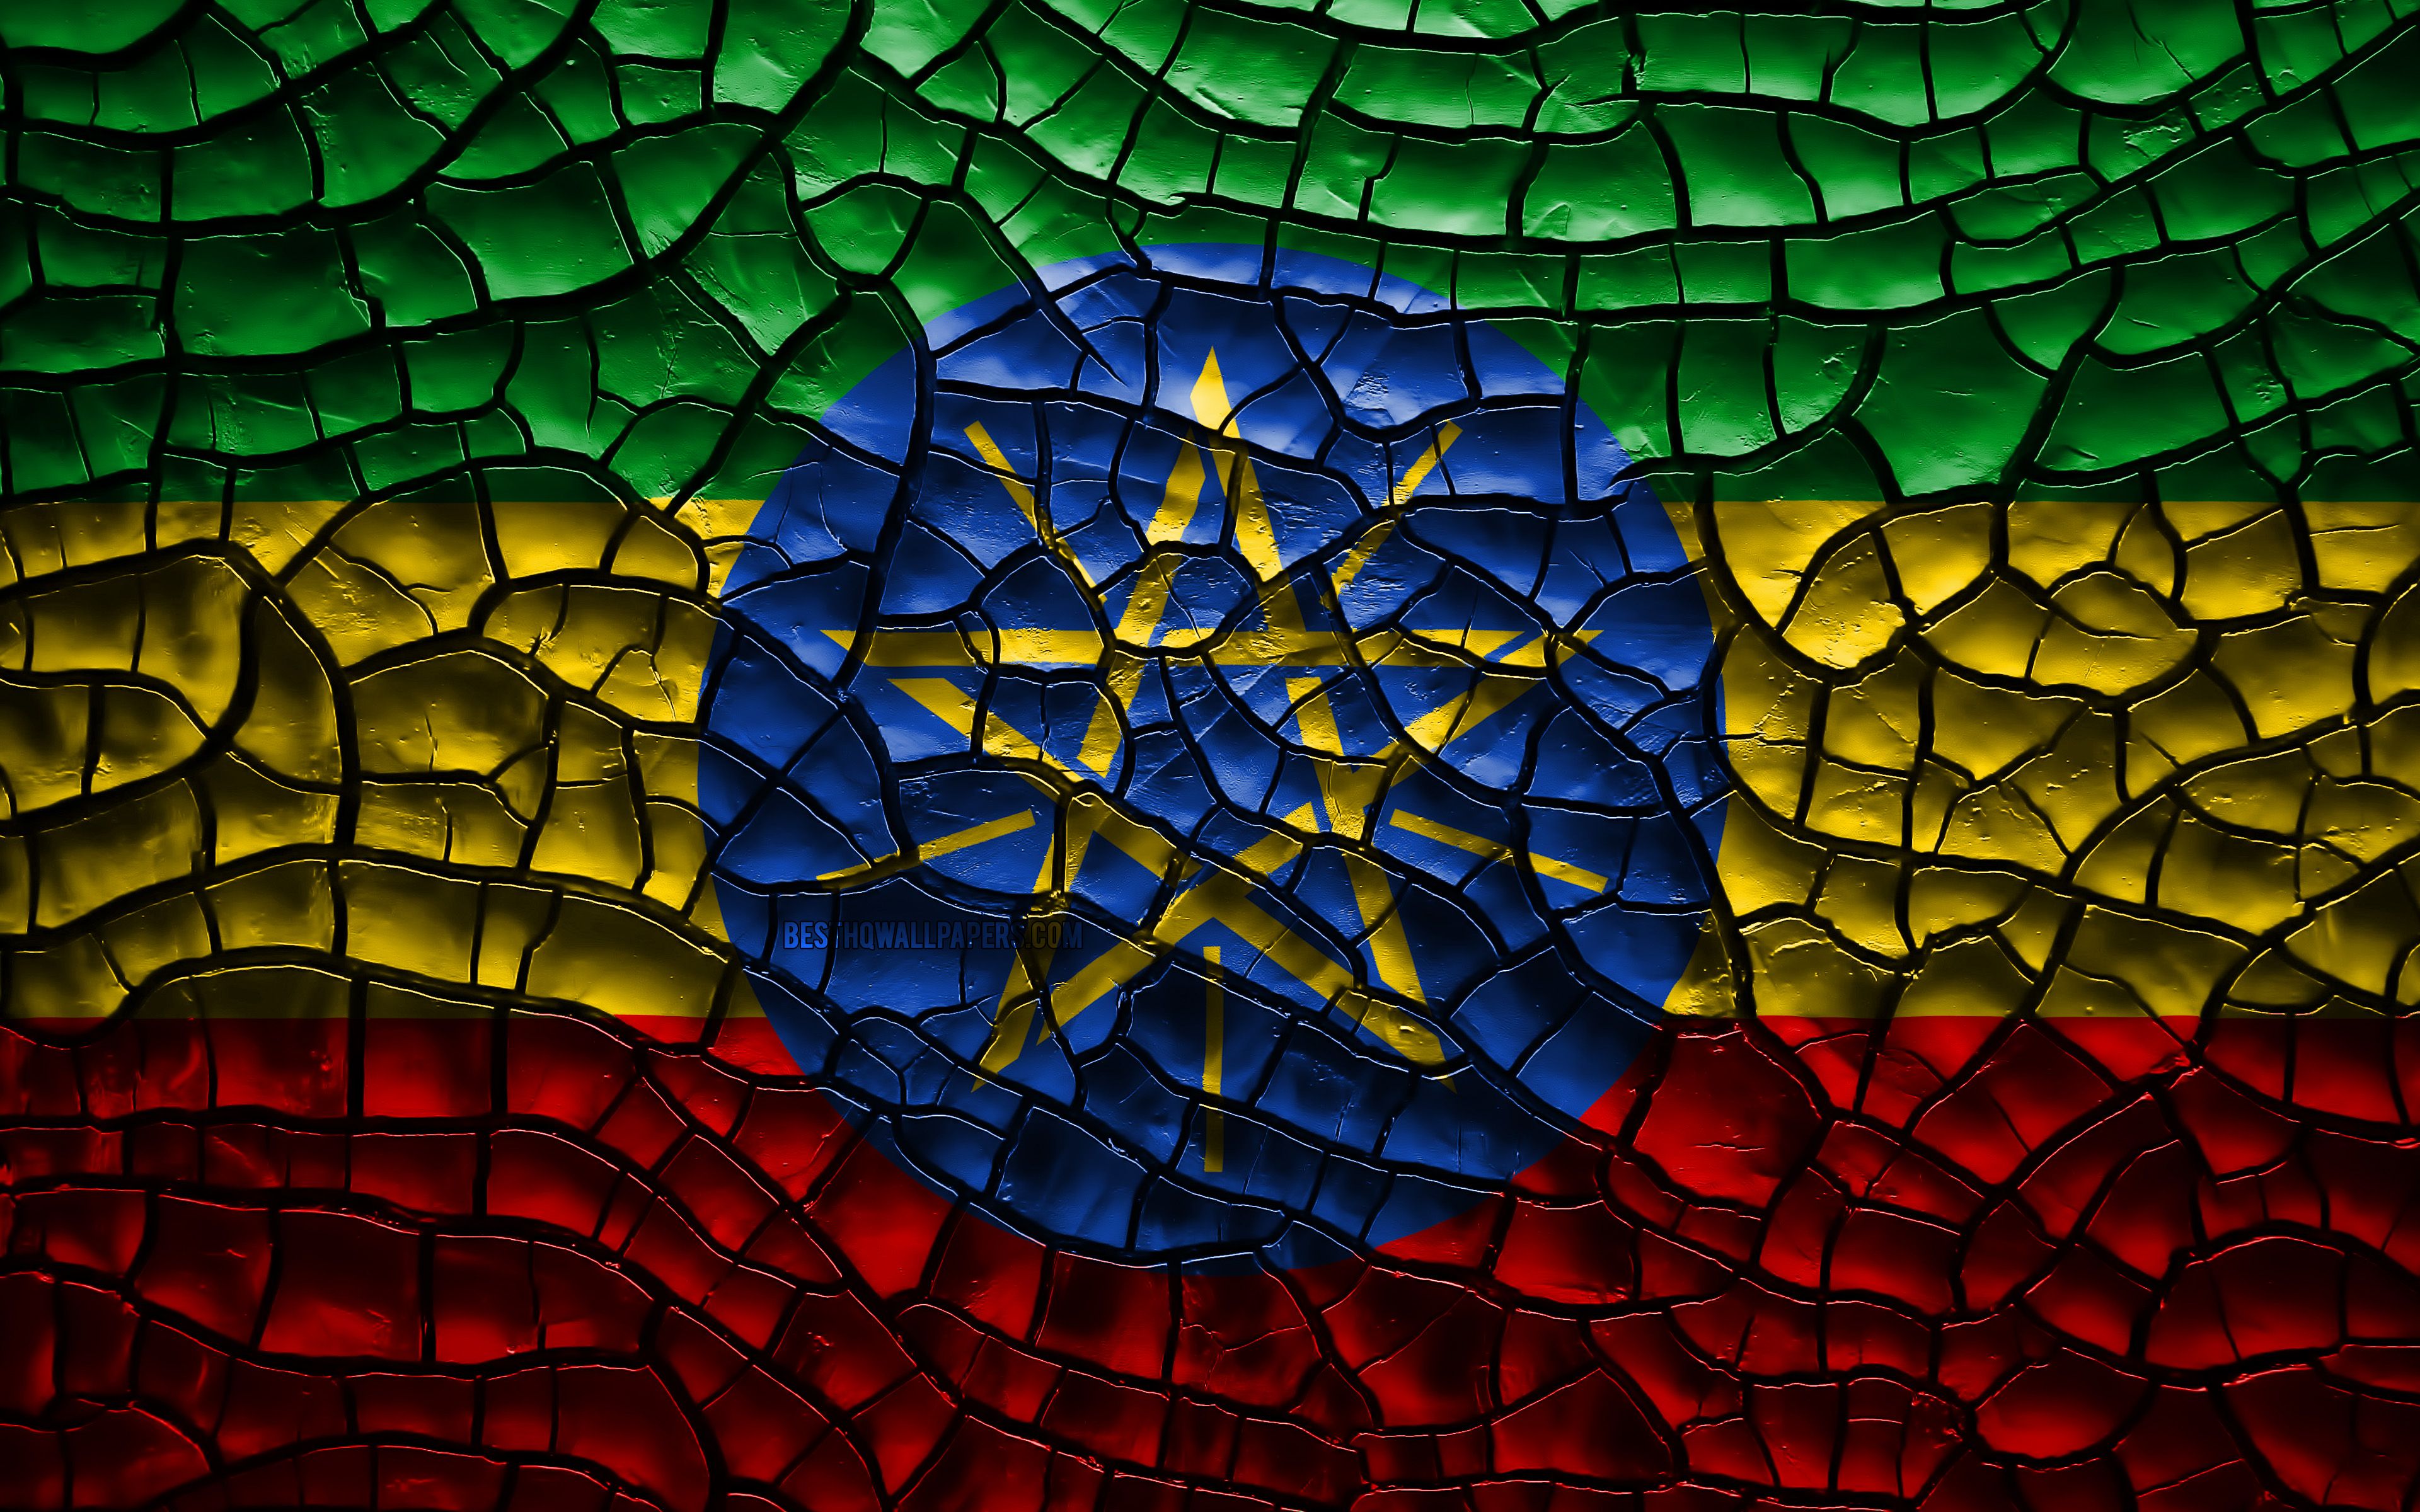 Download wallpaper Flag of Ethiopia, 4k, cracked soil, Africa, Ethiopian flag, 3D art, Ethiopia, African countries, national symbols, Ethiopia 3D flag for desktop with resolution 3840x2400. High Quality HD picture wallpaper